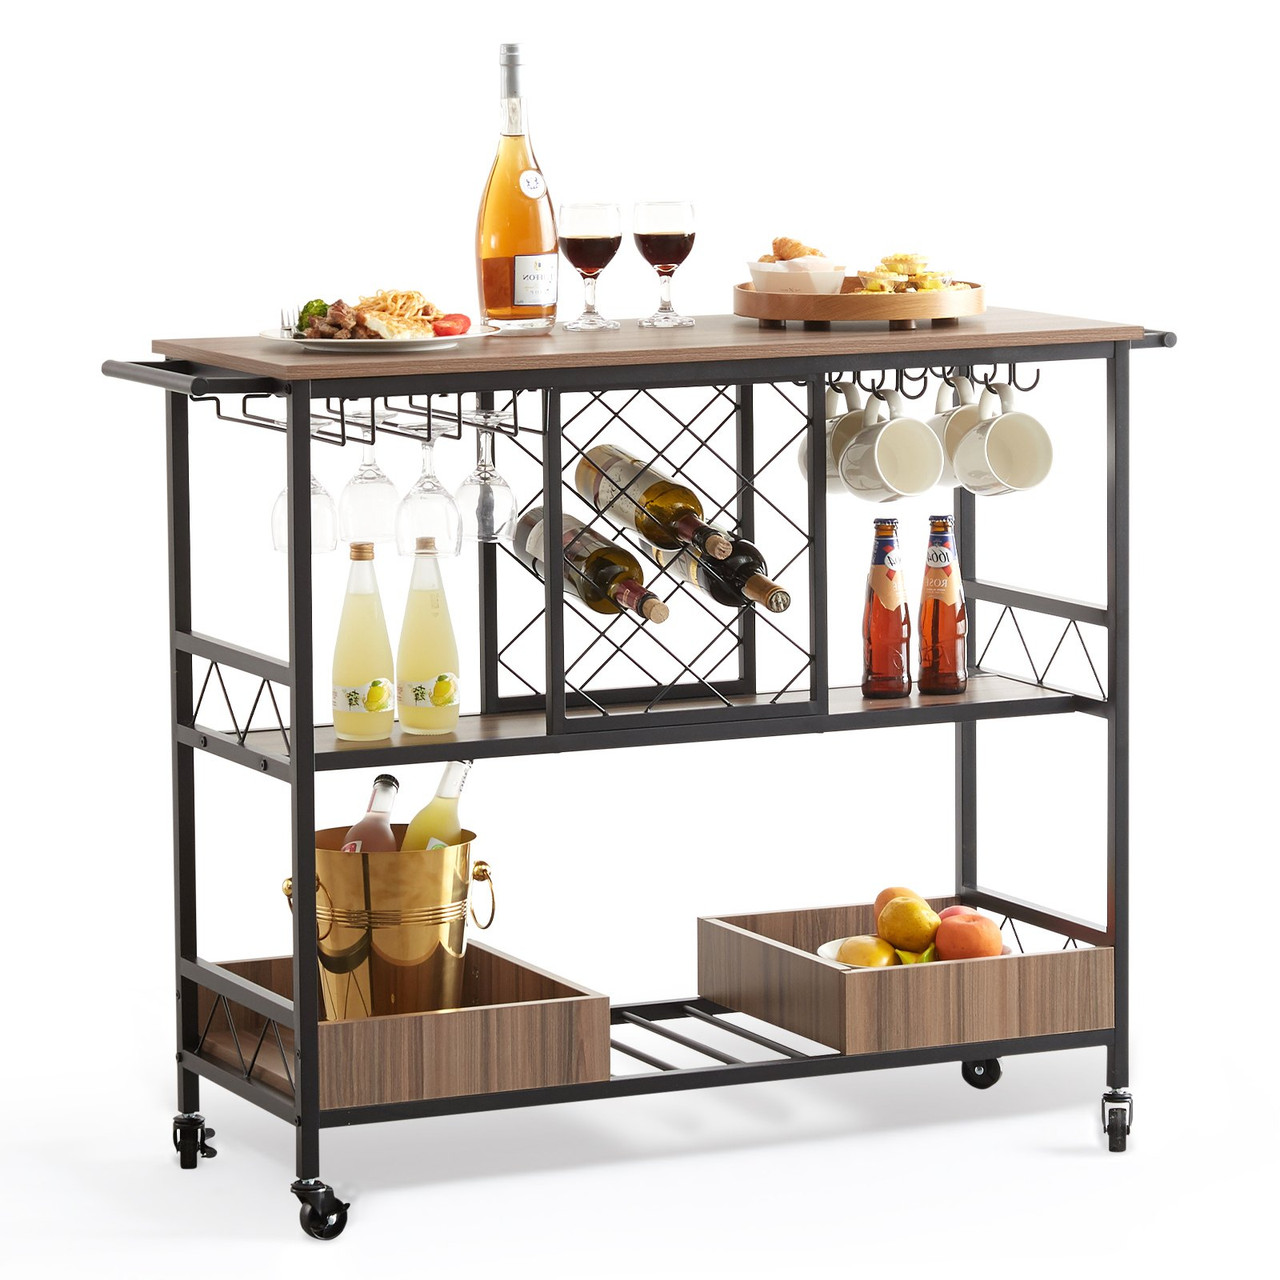 VEVOR 3-Tier Bar Serving Cart Rolling Trolley with Wine Grid Glass Holder 300LBS